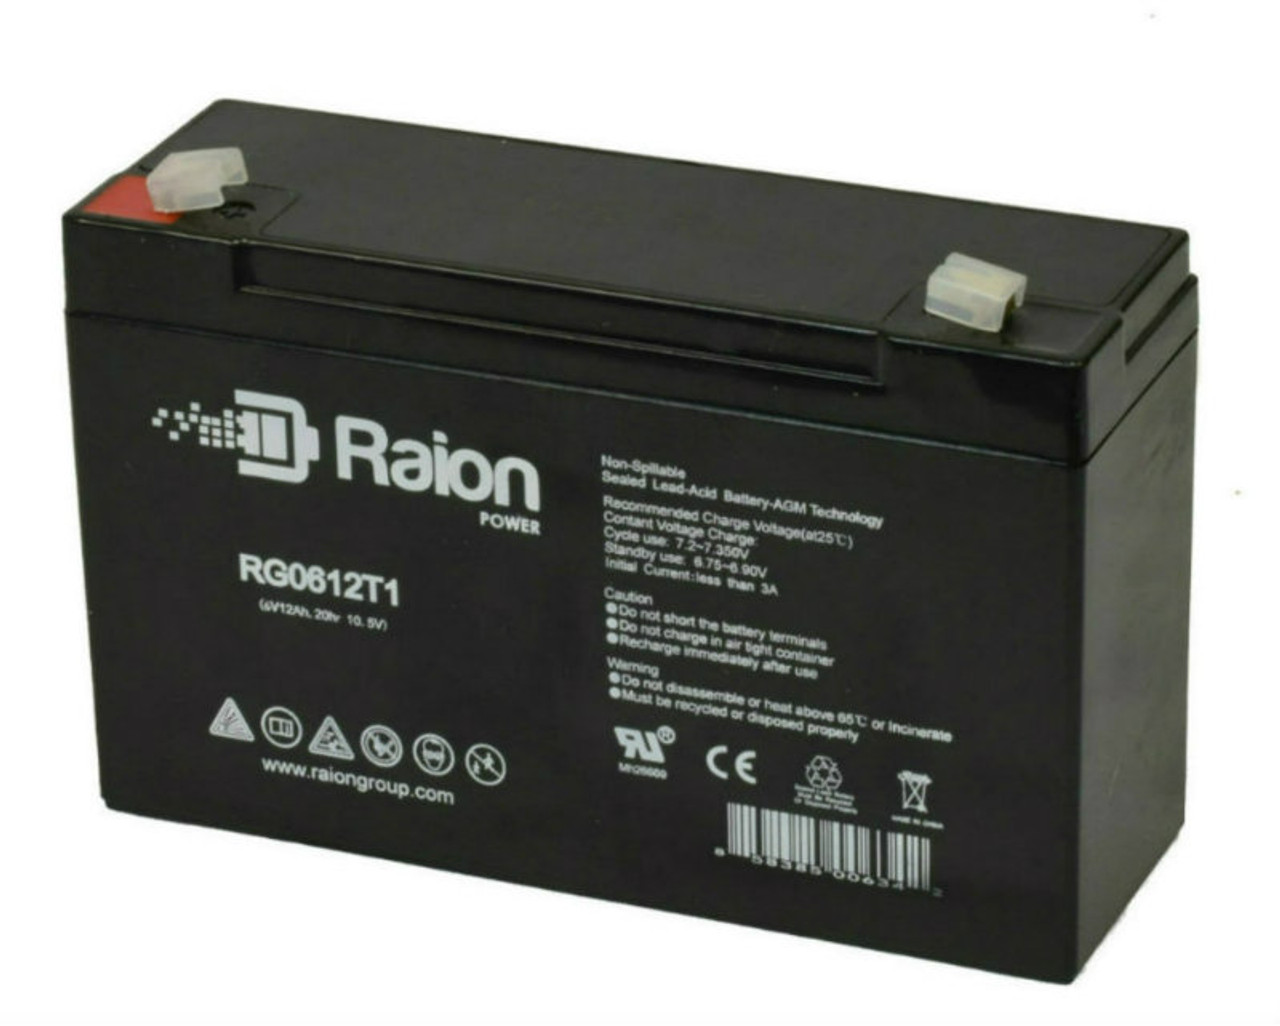 Raion Power RG06120T1 6V 12Ah Replacement UPS Battery Cartridge for Datashield ST550